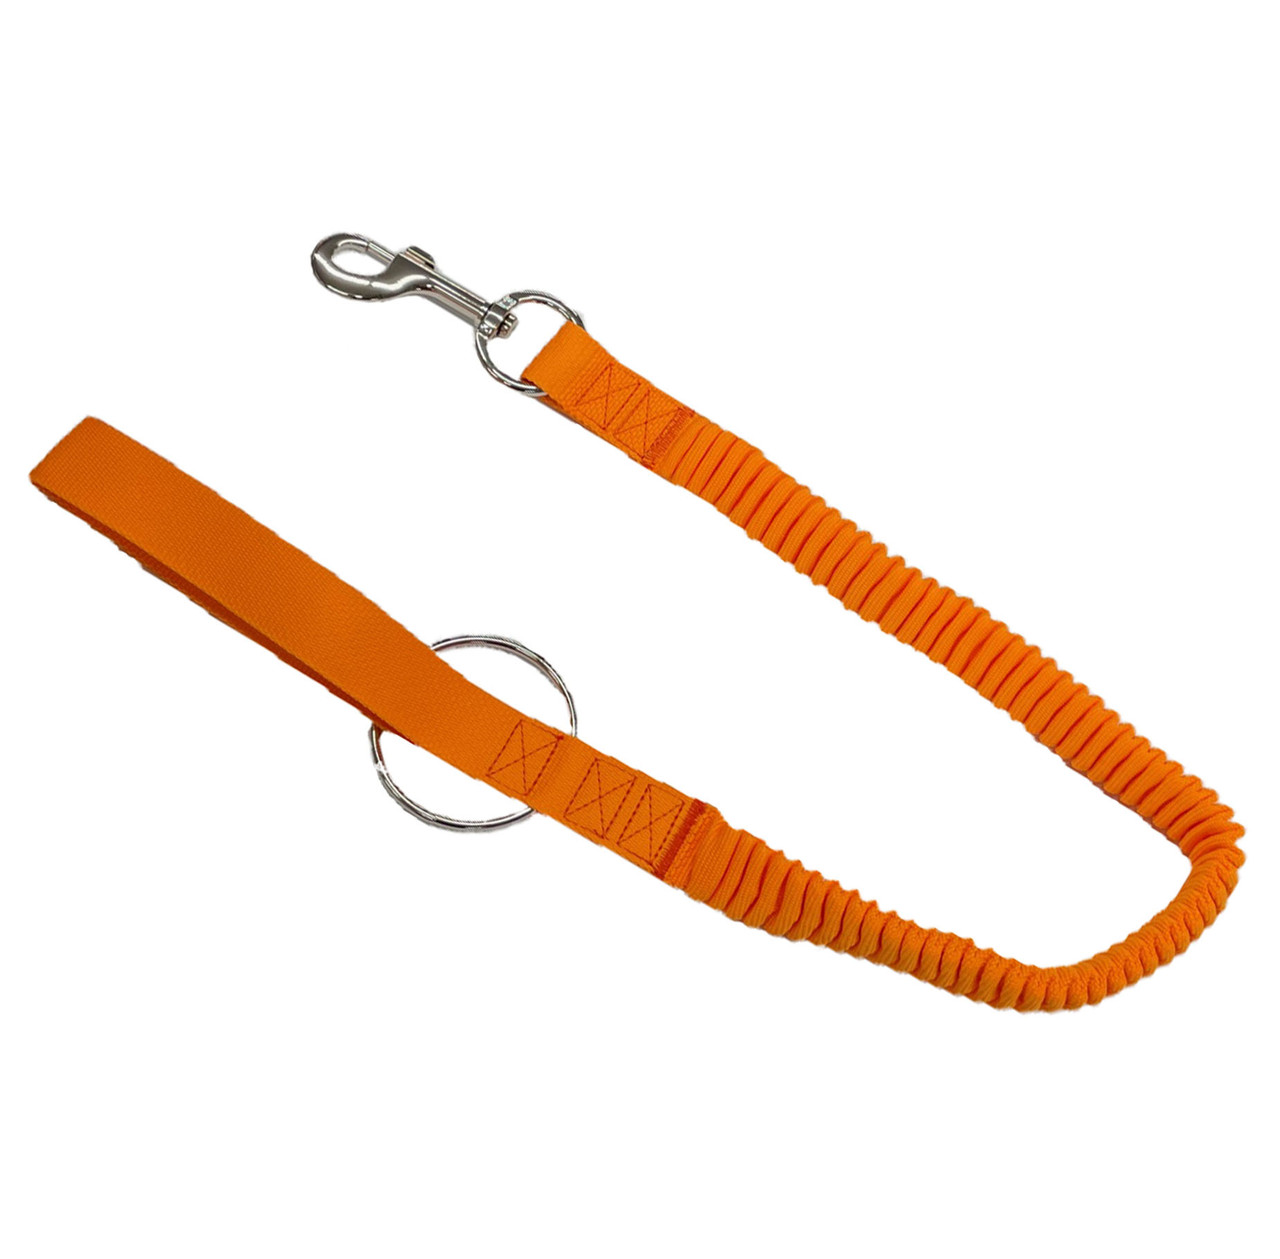 Forester Bungee Chainsaw Lanyard - 46in.L, Model# 03140